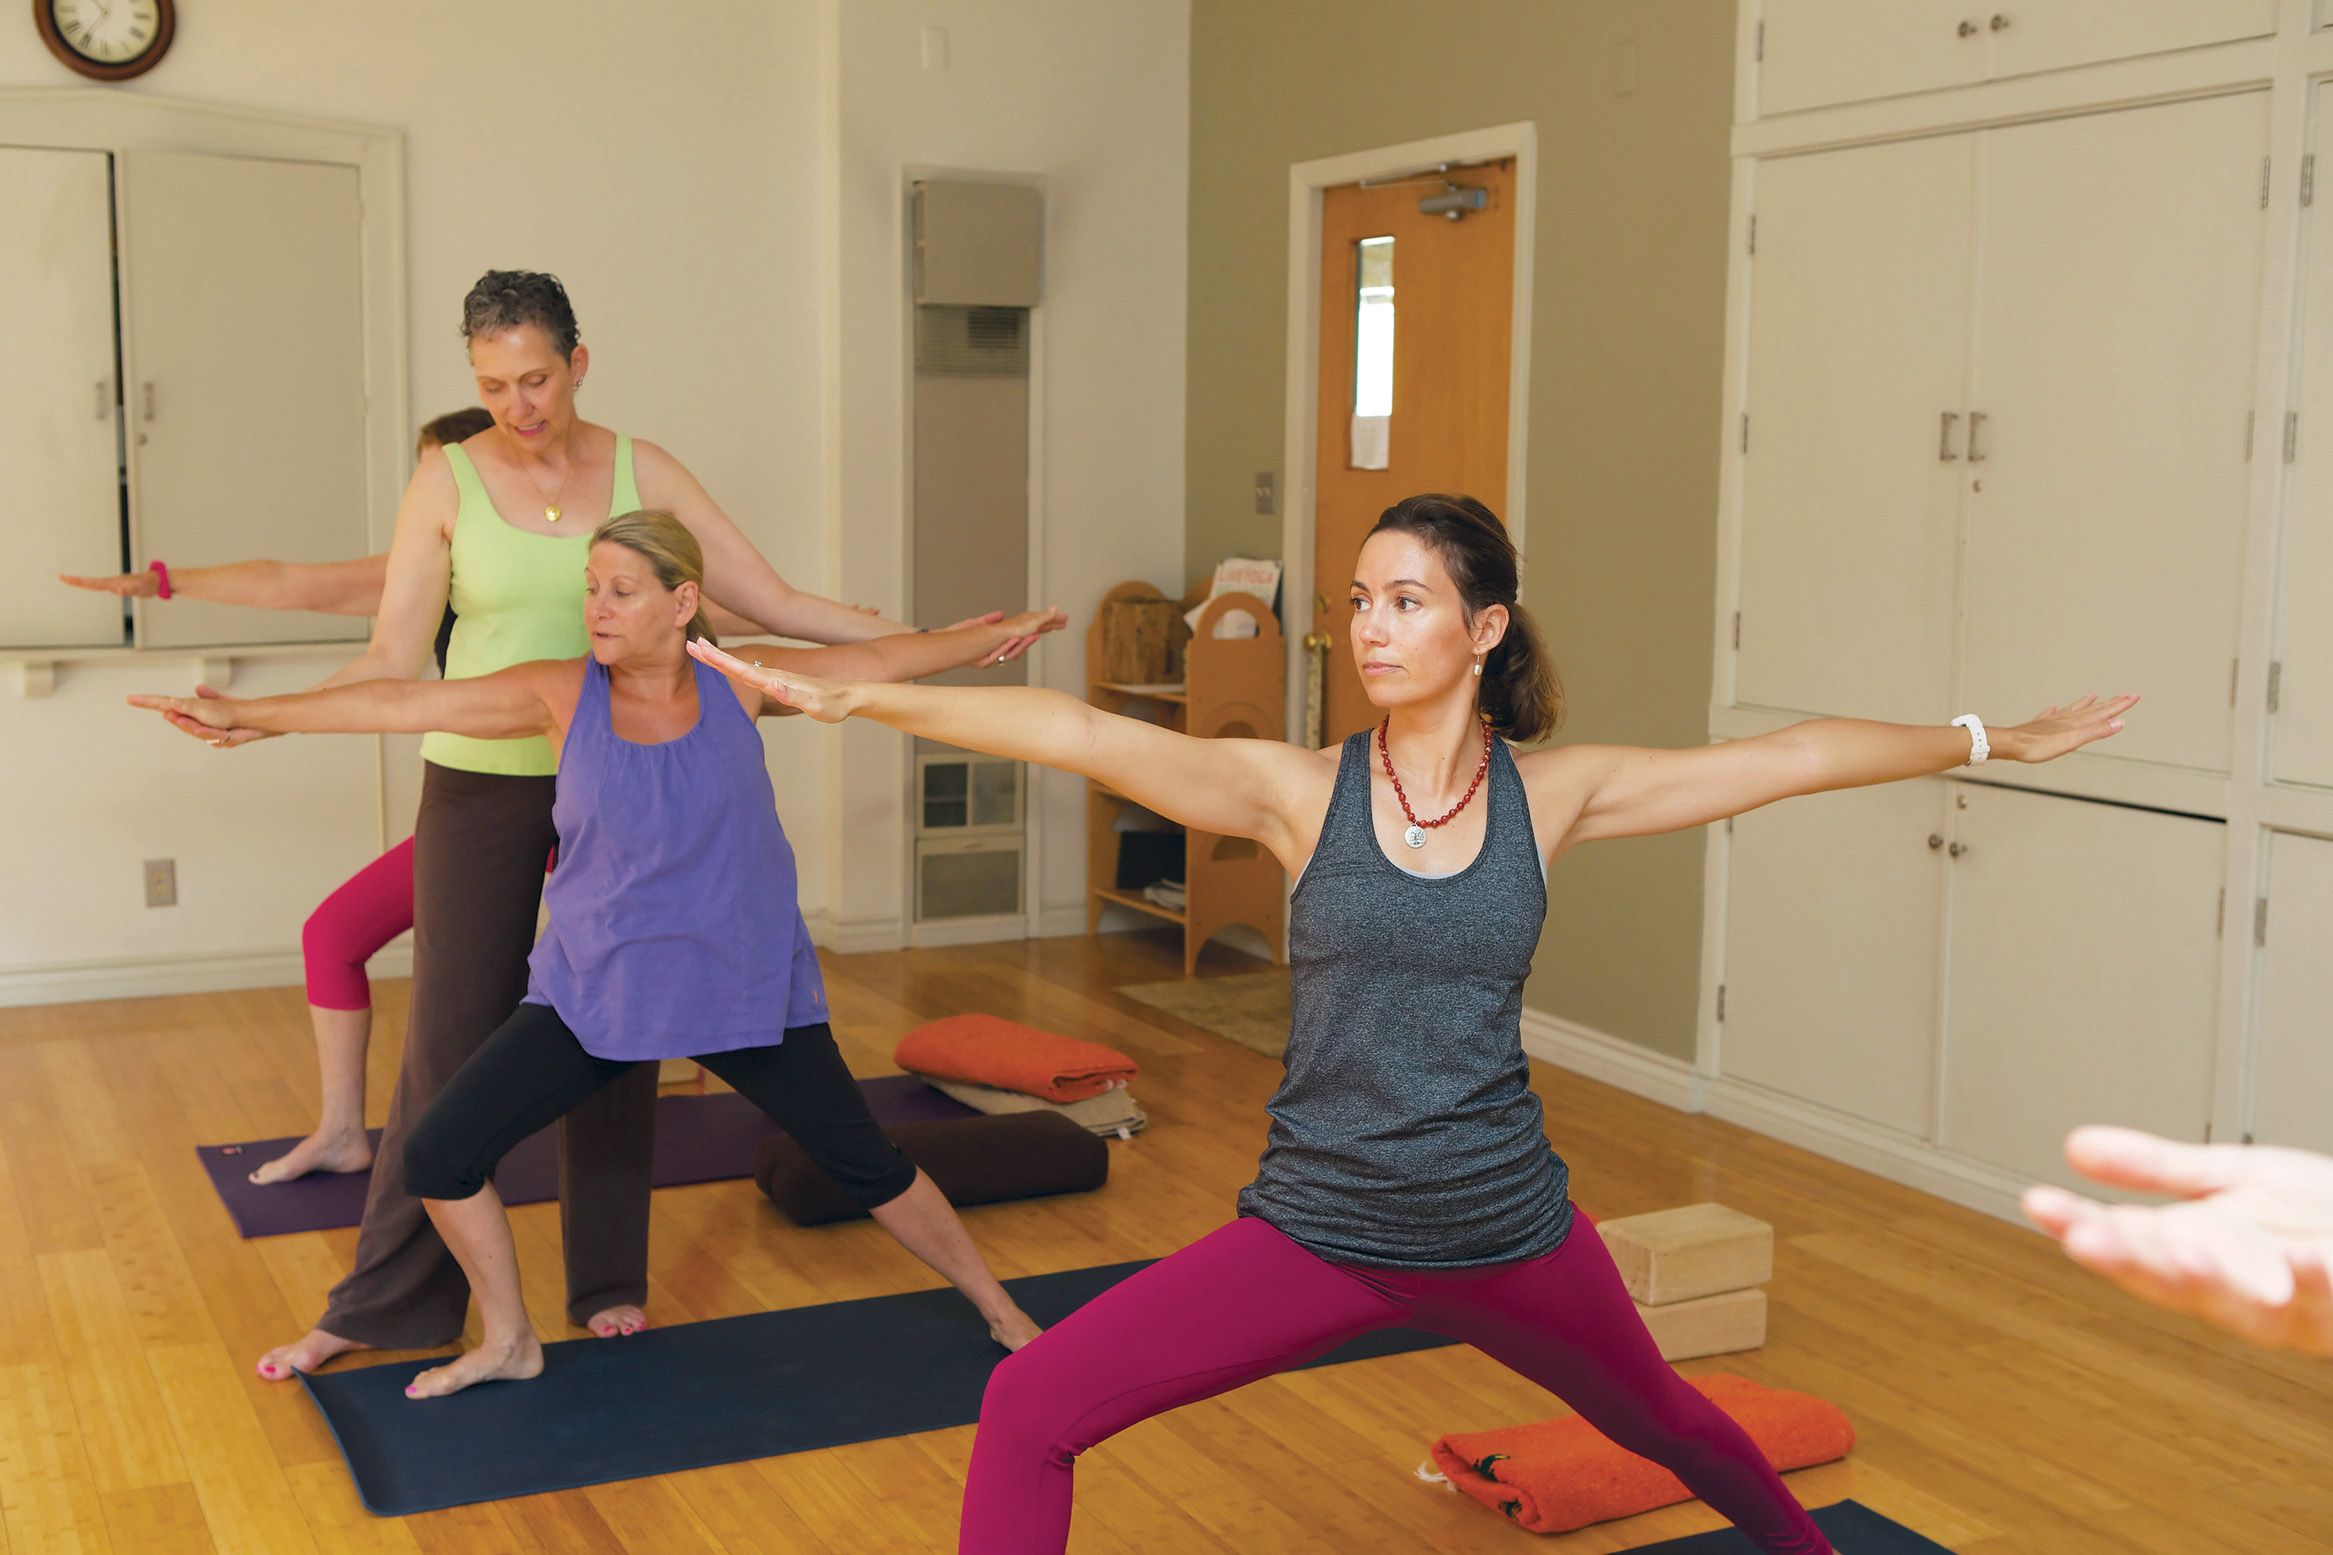 Westchester Yoga studio works to bring balance to members